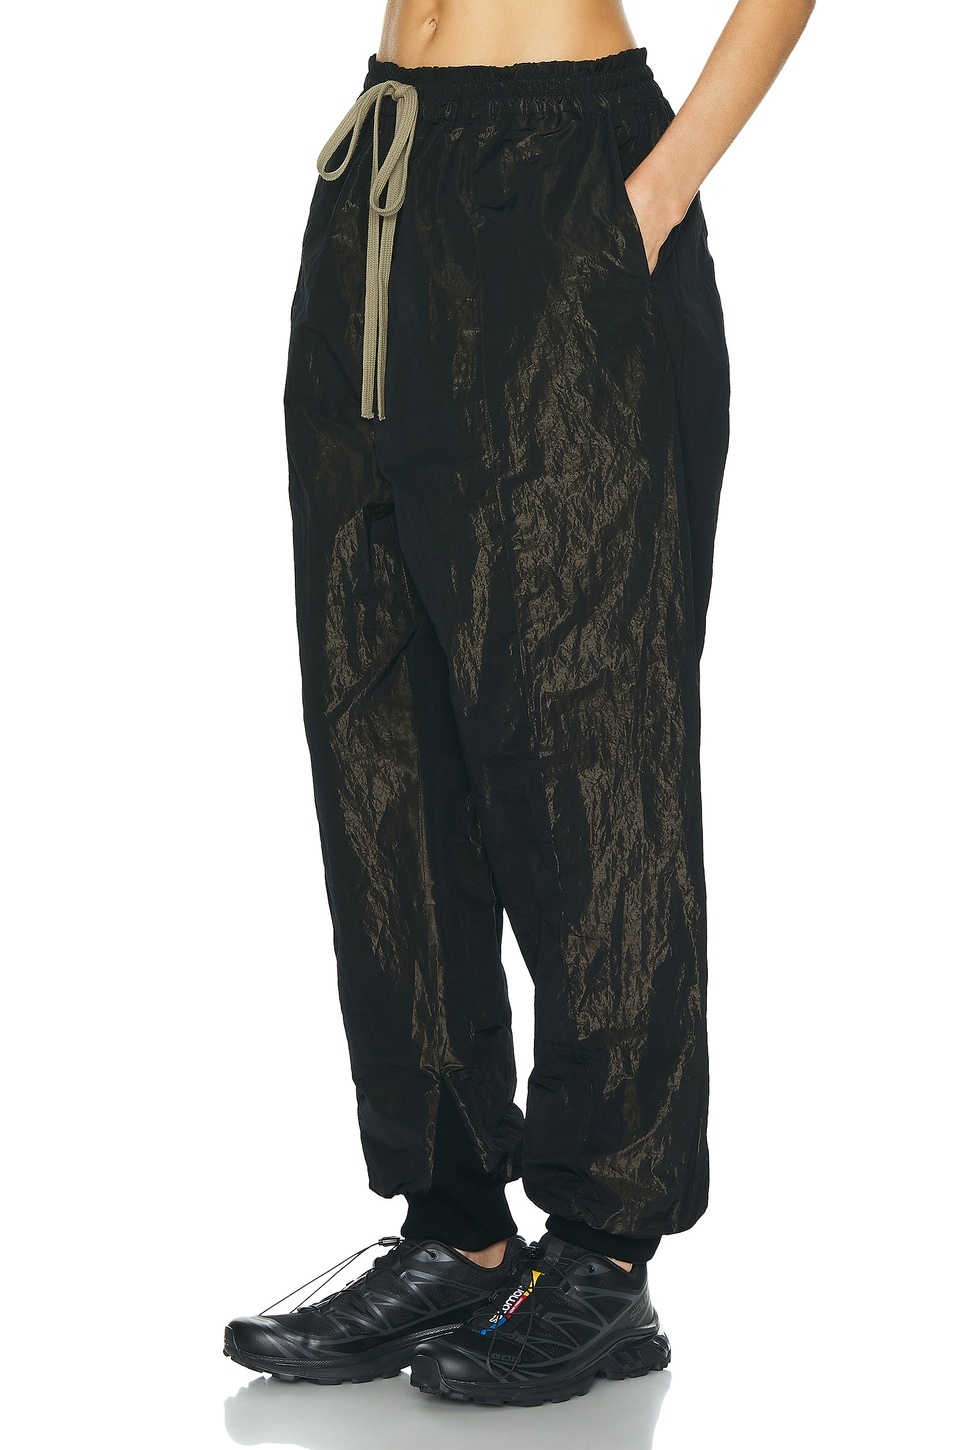 Wrinkled Polyester Pintuck Sweatpant - 3